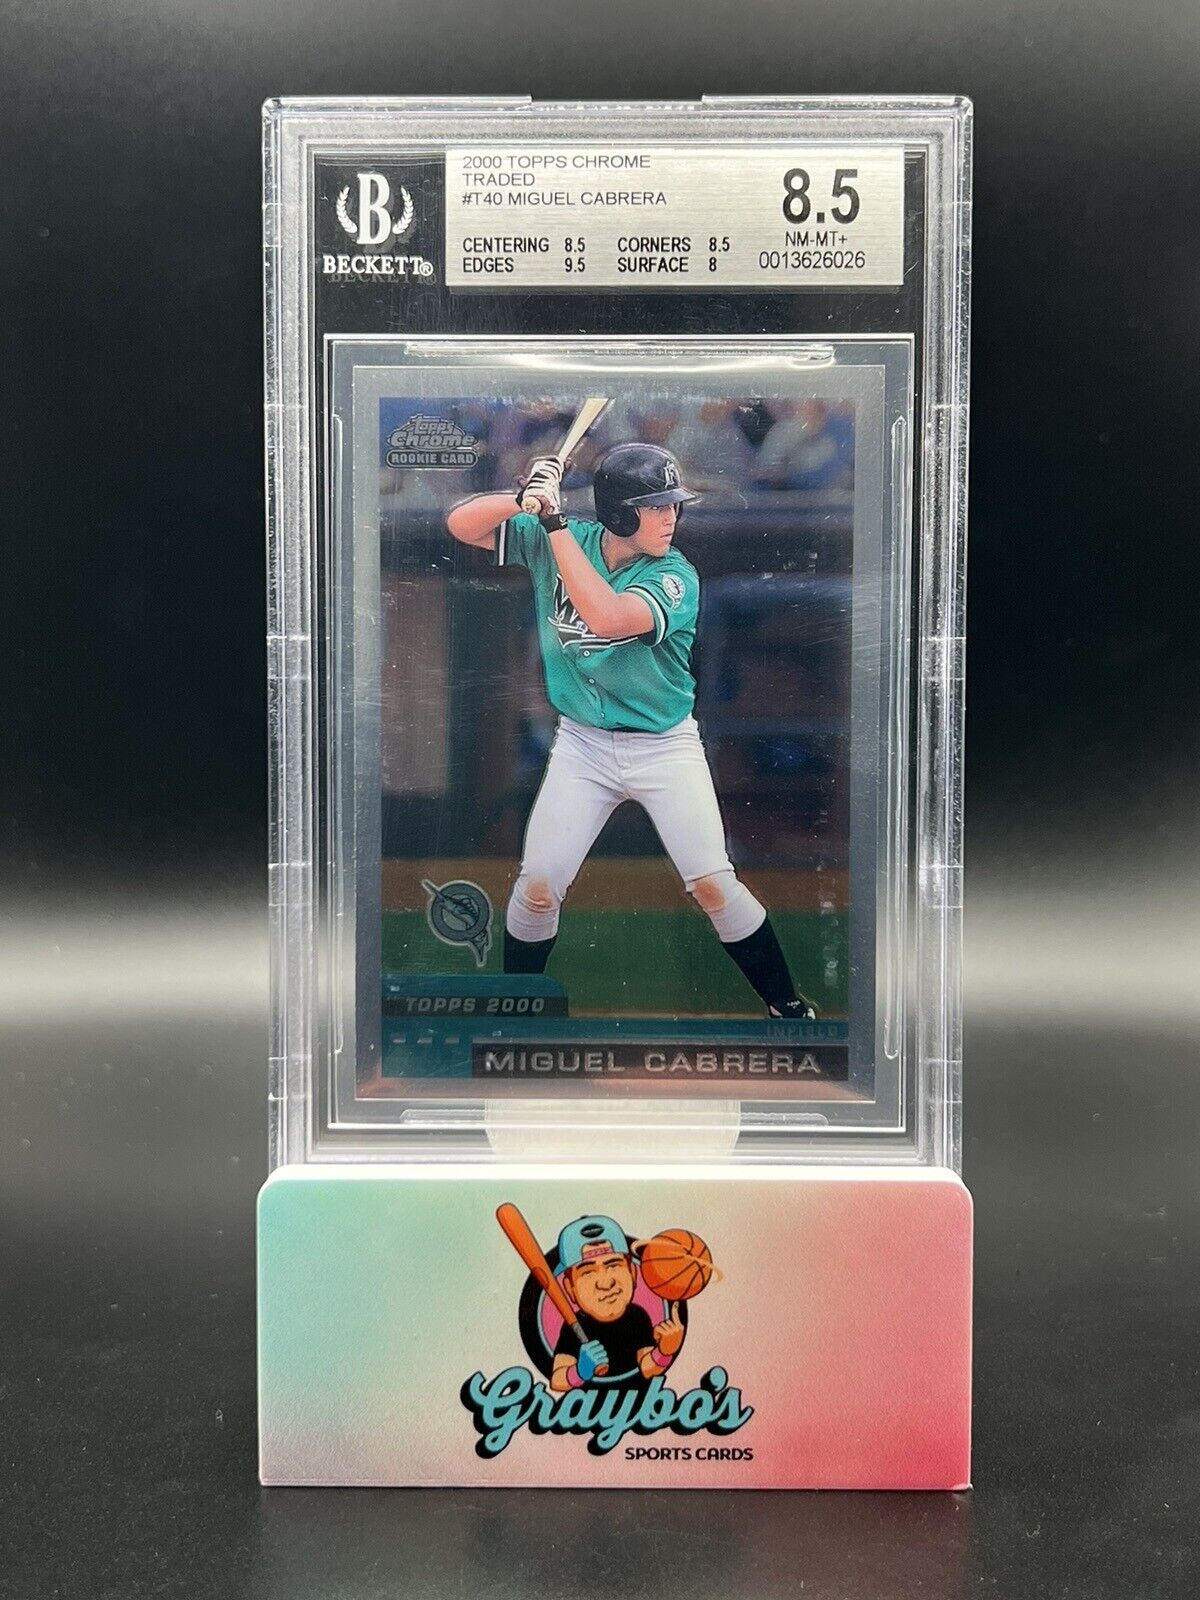 2000 Topps Chrome Traded Miguel Cabrera #T40 BGS 8.5